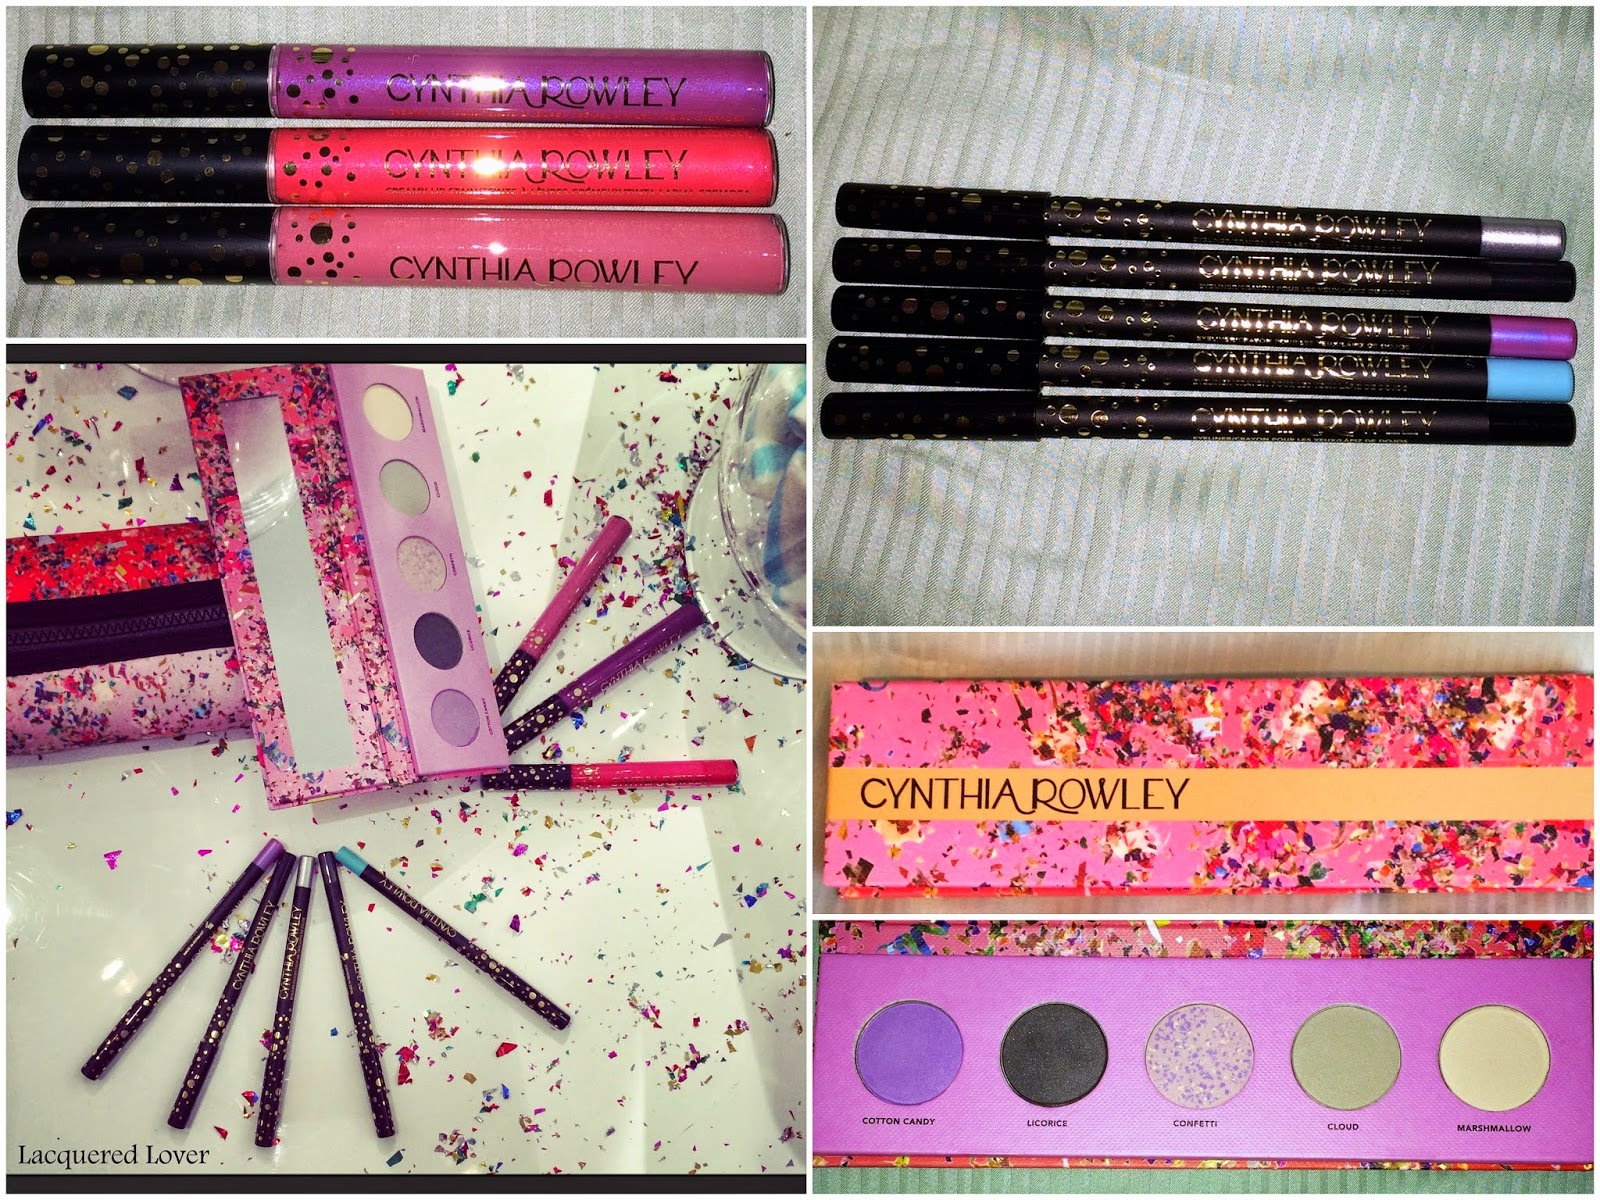 Cynthia Rowley Beauty Spring 2014 Swatches And Review Lacquered Images, Photos, Reviews